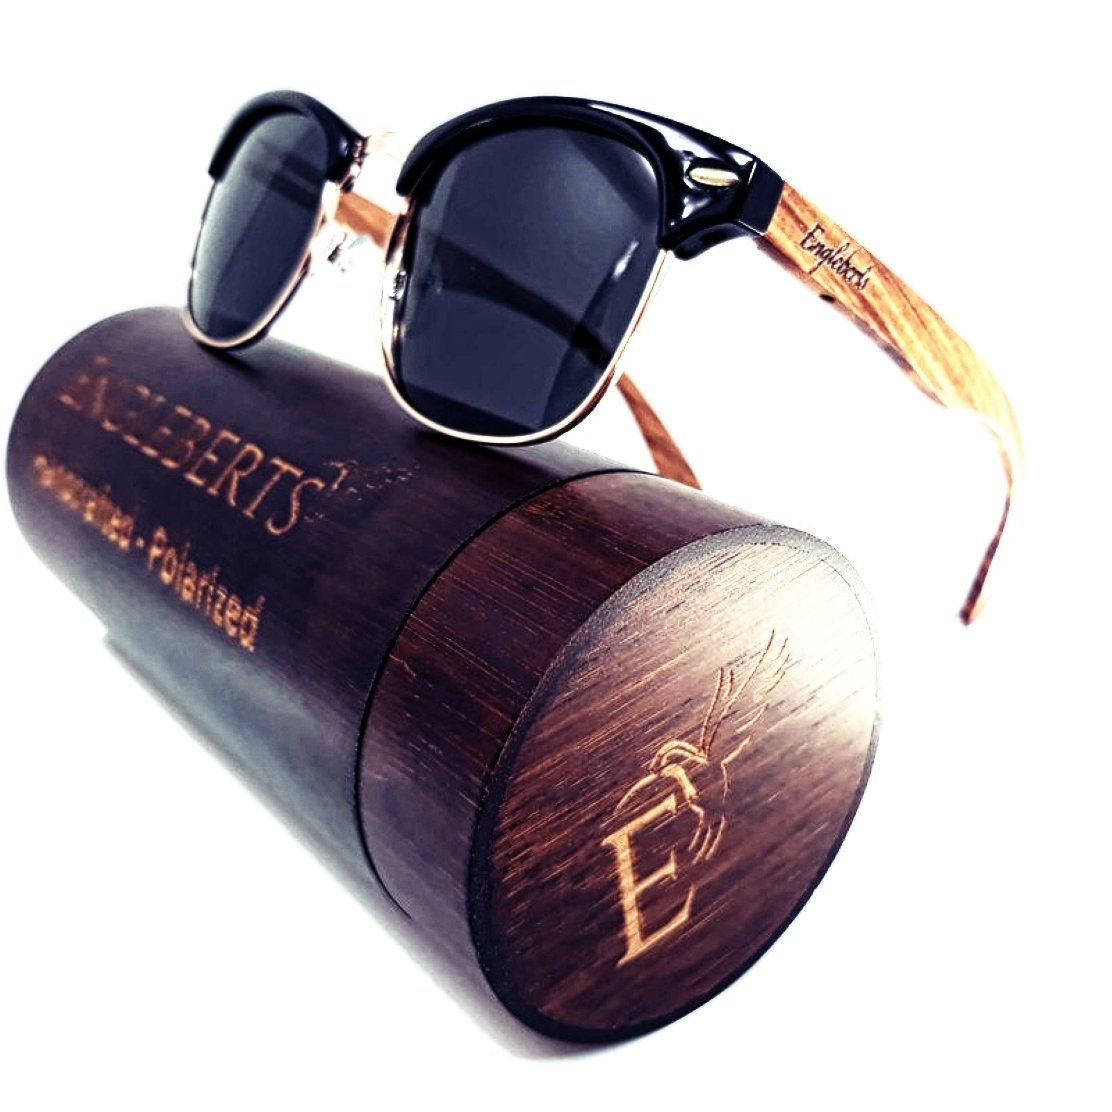 Handcrafted Walnut Wood Club Style Sunglasses With Bamboo Case, Sunglasses 